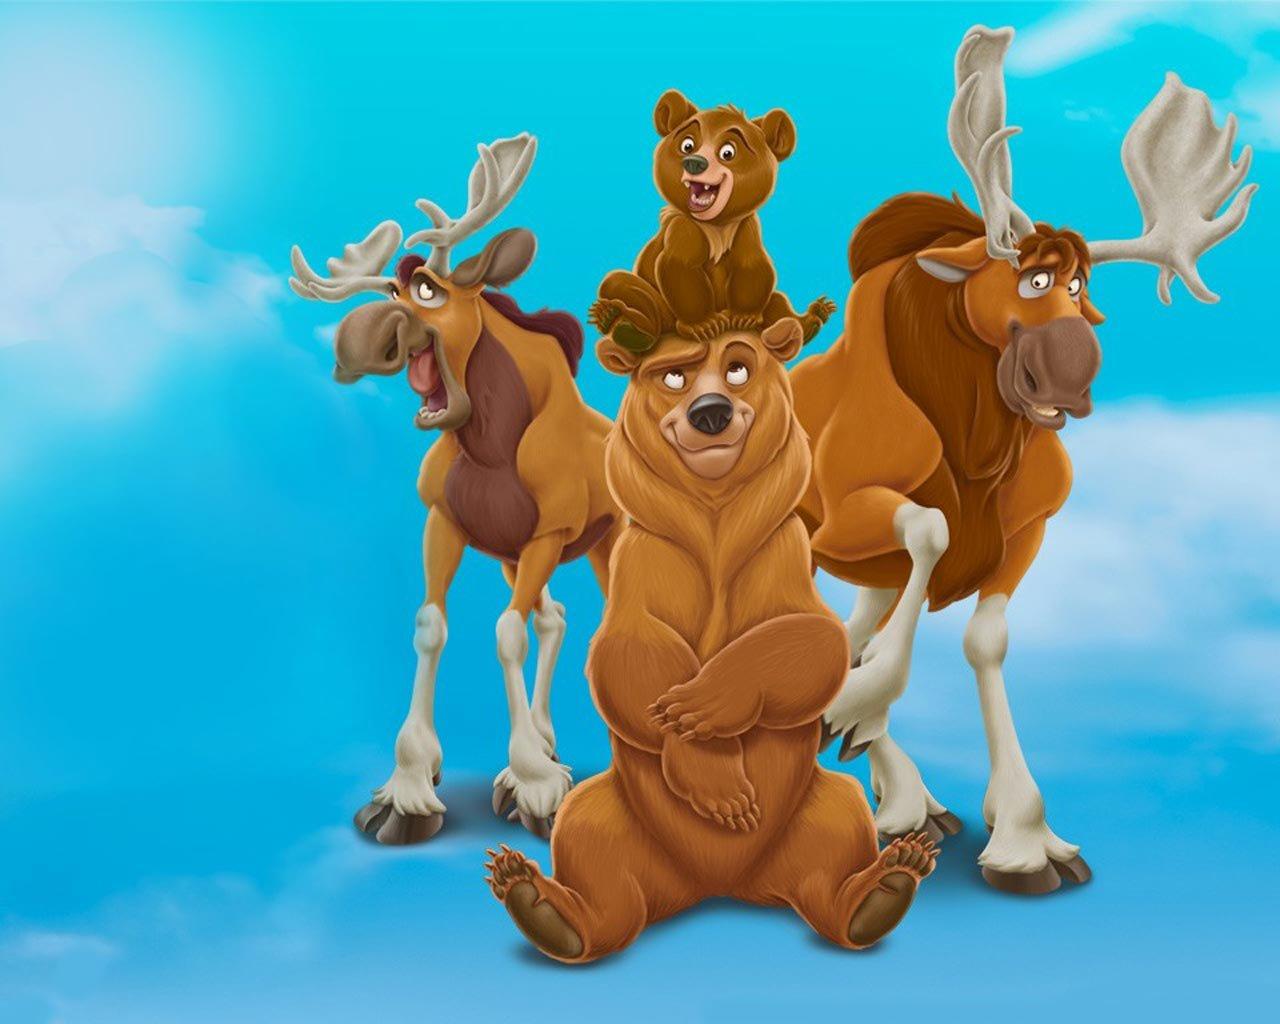 Wallpaper of Brother Bear